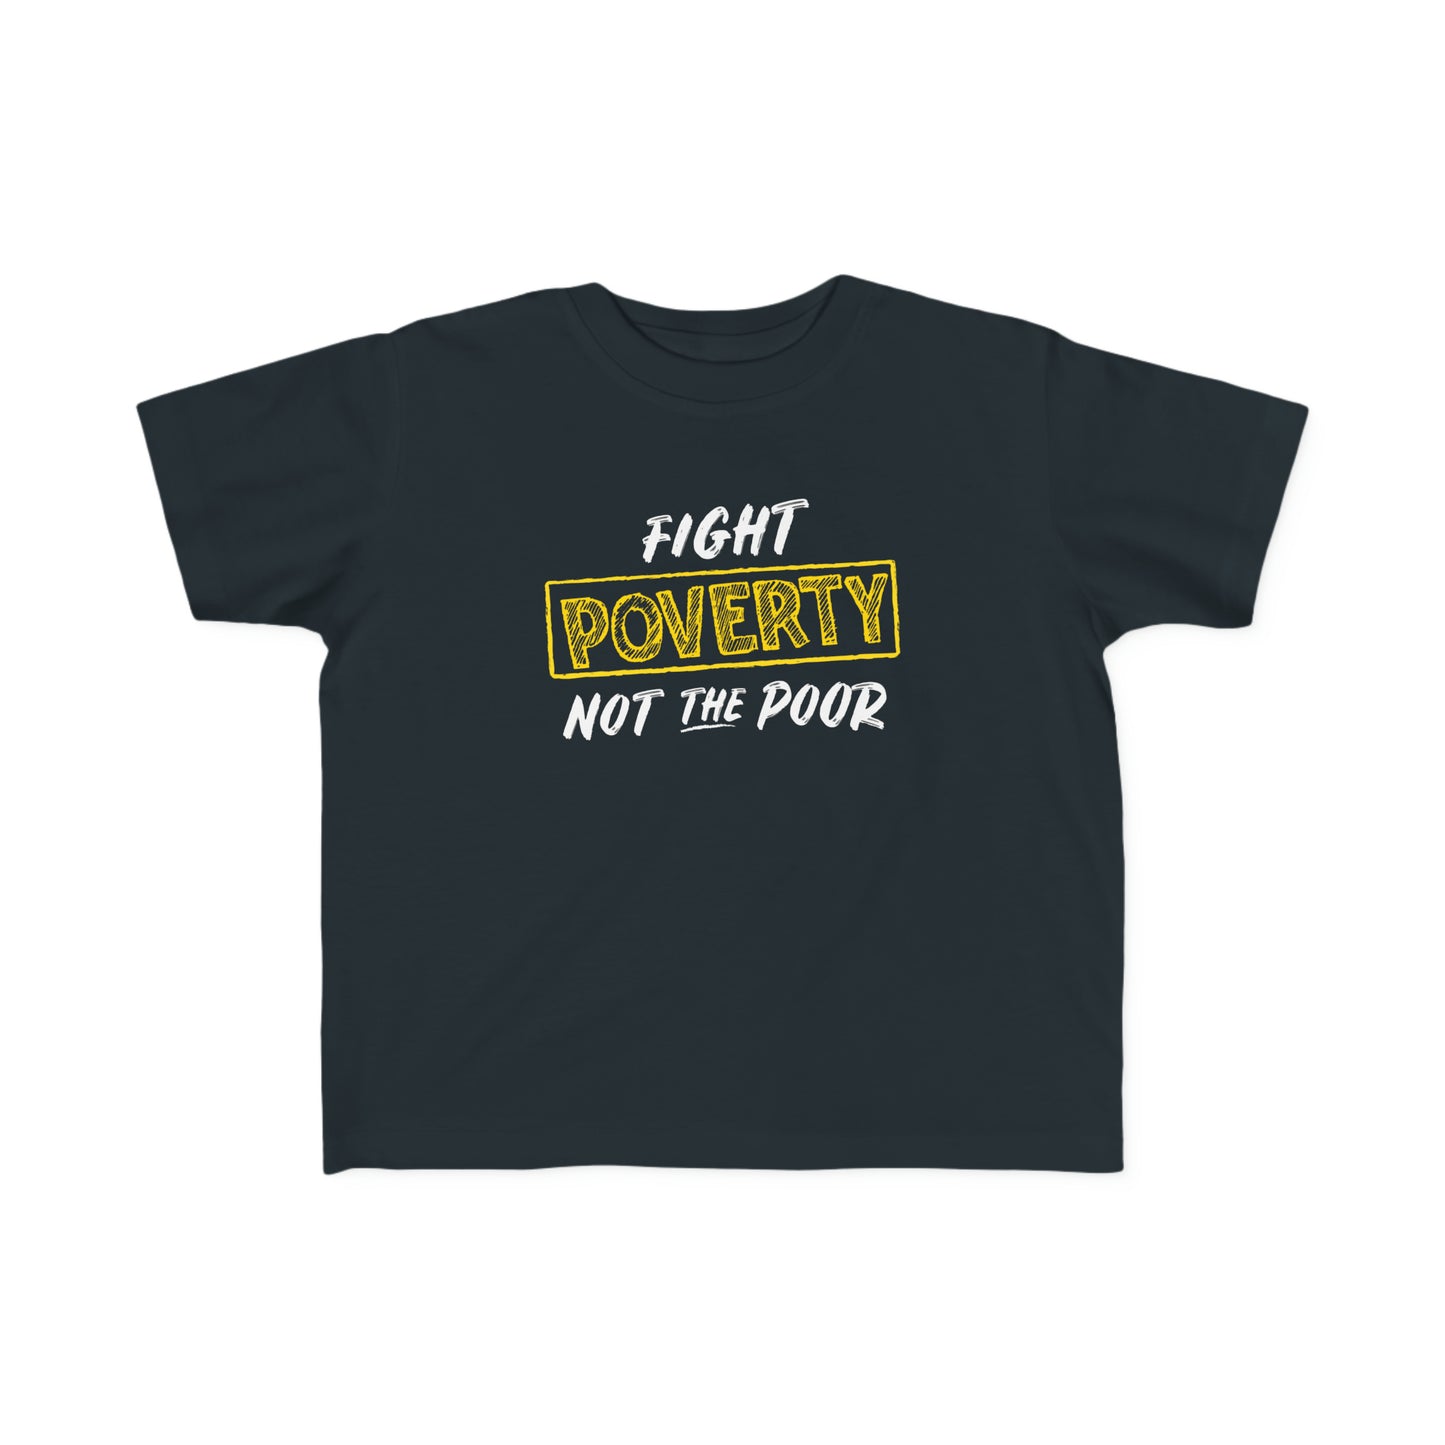 “Fight Poverty Not The Poor” Toddler's Tee